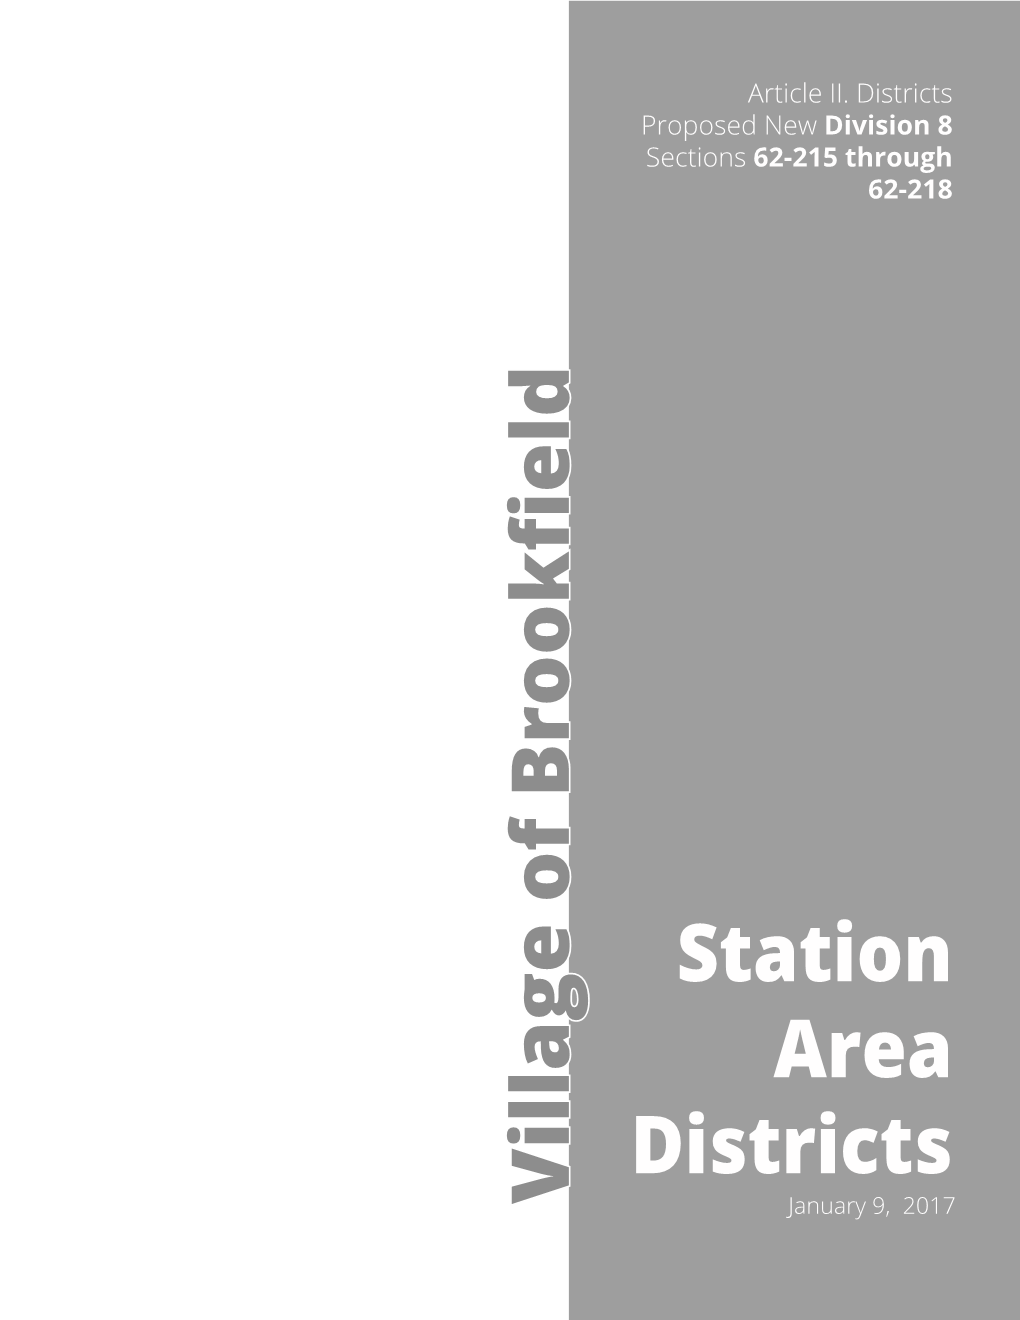 Village of Brookfield Station Area Districts 1 62-215